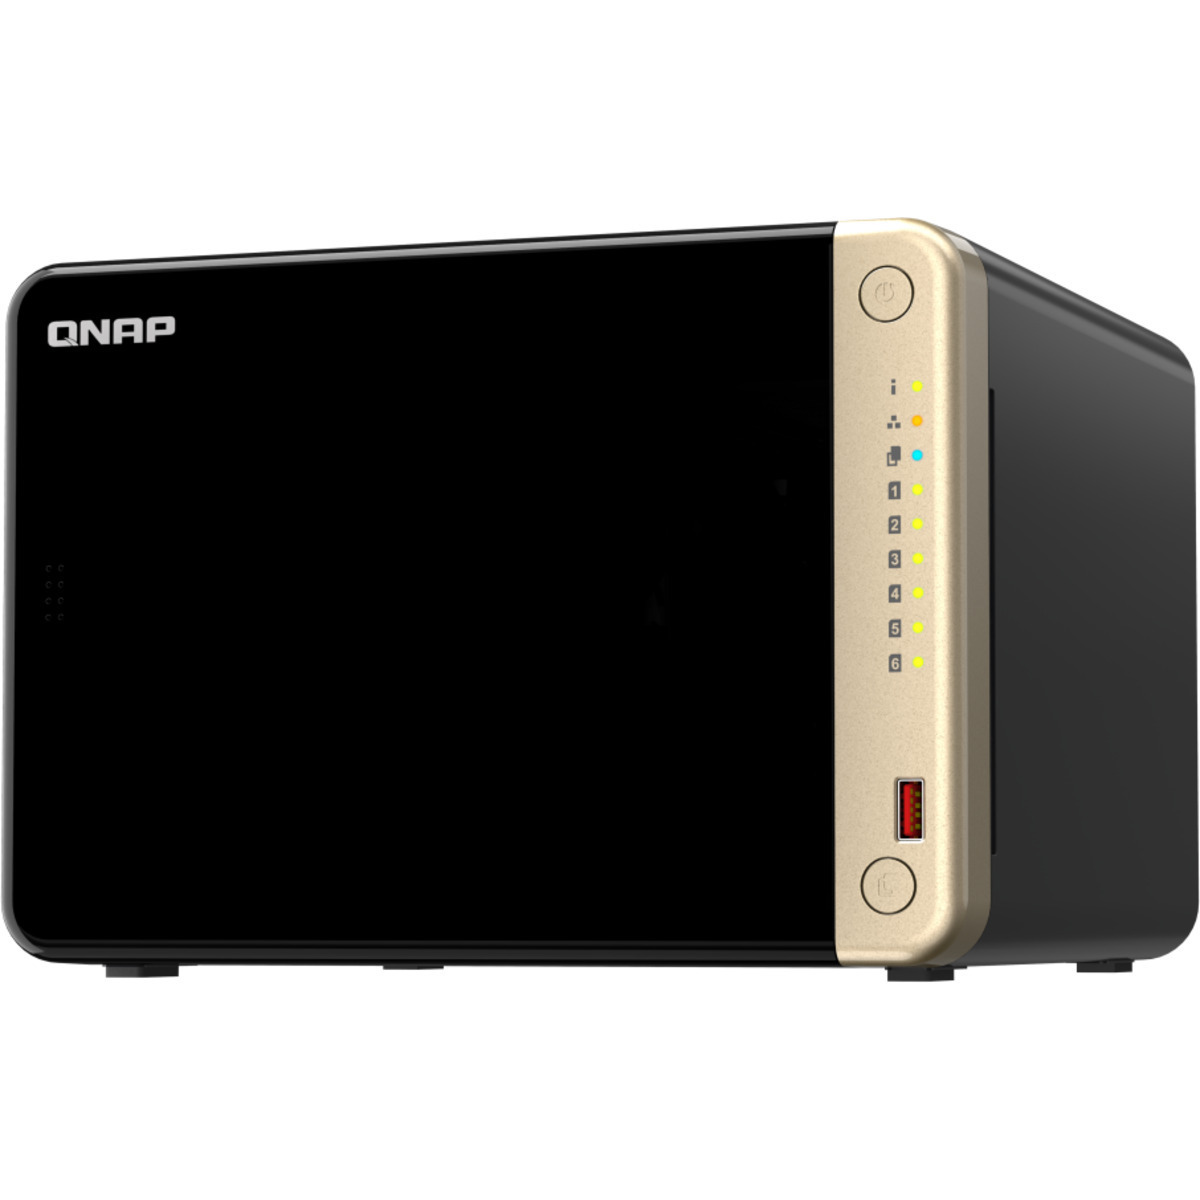 buy QNAP TS-664 12tb Desktop NAS - Network Attached Storage Device 6x2000gb Seagate IronWolf Pro ST2000NT001 3.5 7200rpm SATA 6Gb/s HDD NAS Class Drives Installed - Burn-In Tested - nas headquarters buy network attached storage server device das new raid-5 free shipping usa spring sale TS-664